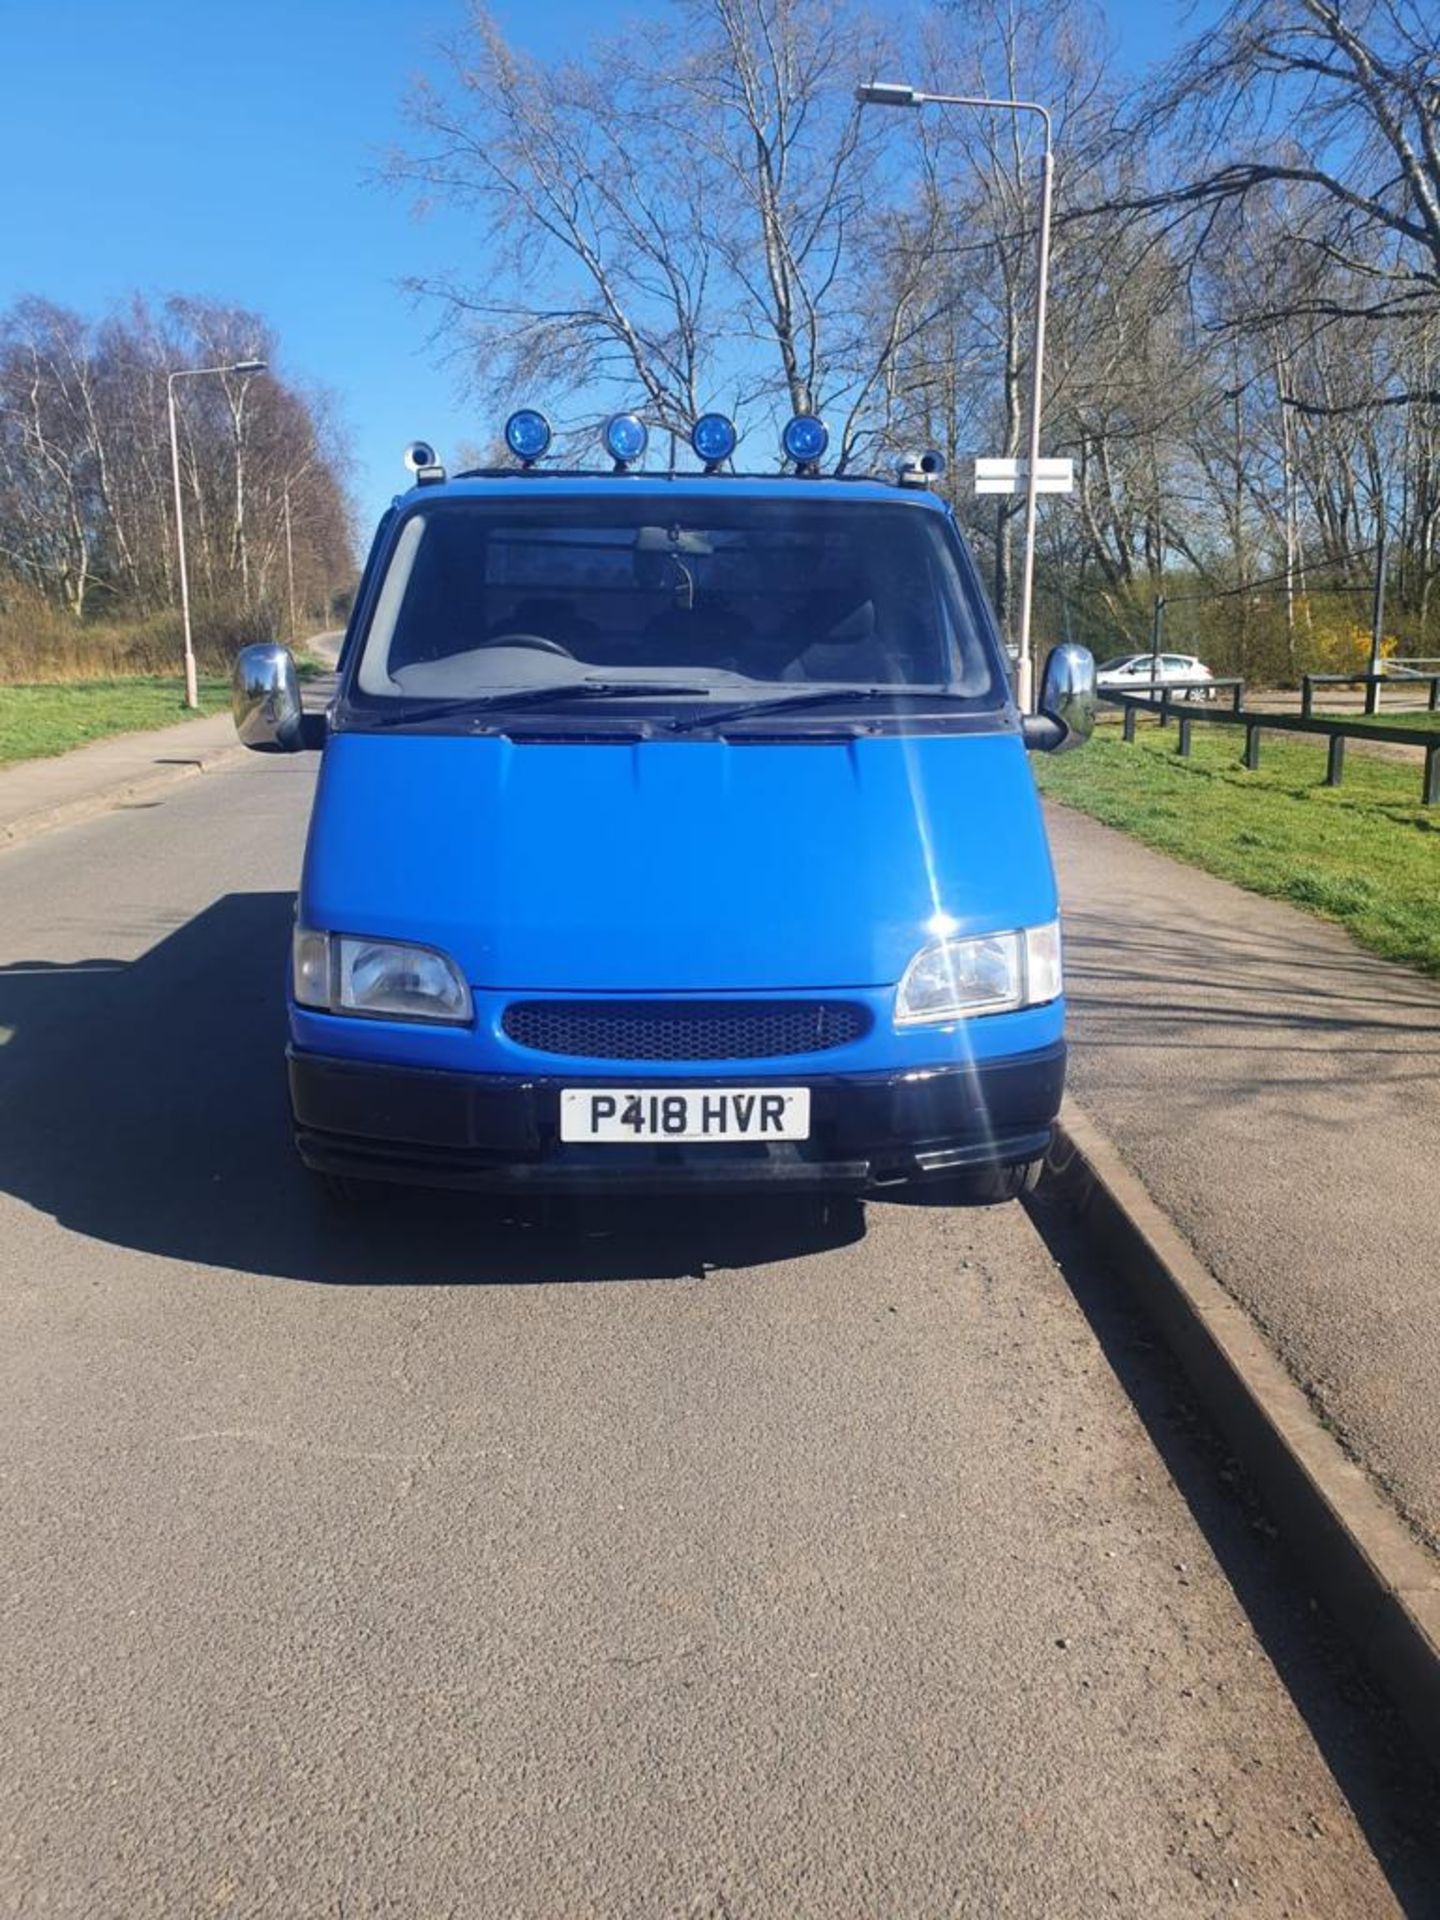 1997 FORD TRANSIT FLARESIDE, BLUE PICK-UP, DIESEL, SHOWING 10 PREVIOUS KEEPERS *NO VAT* - Image 2 of 6